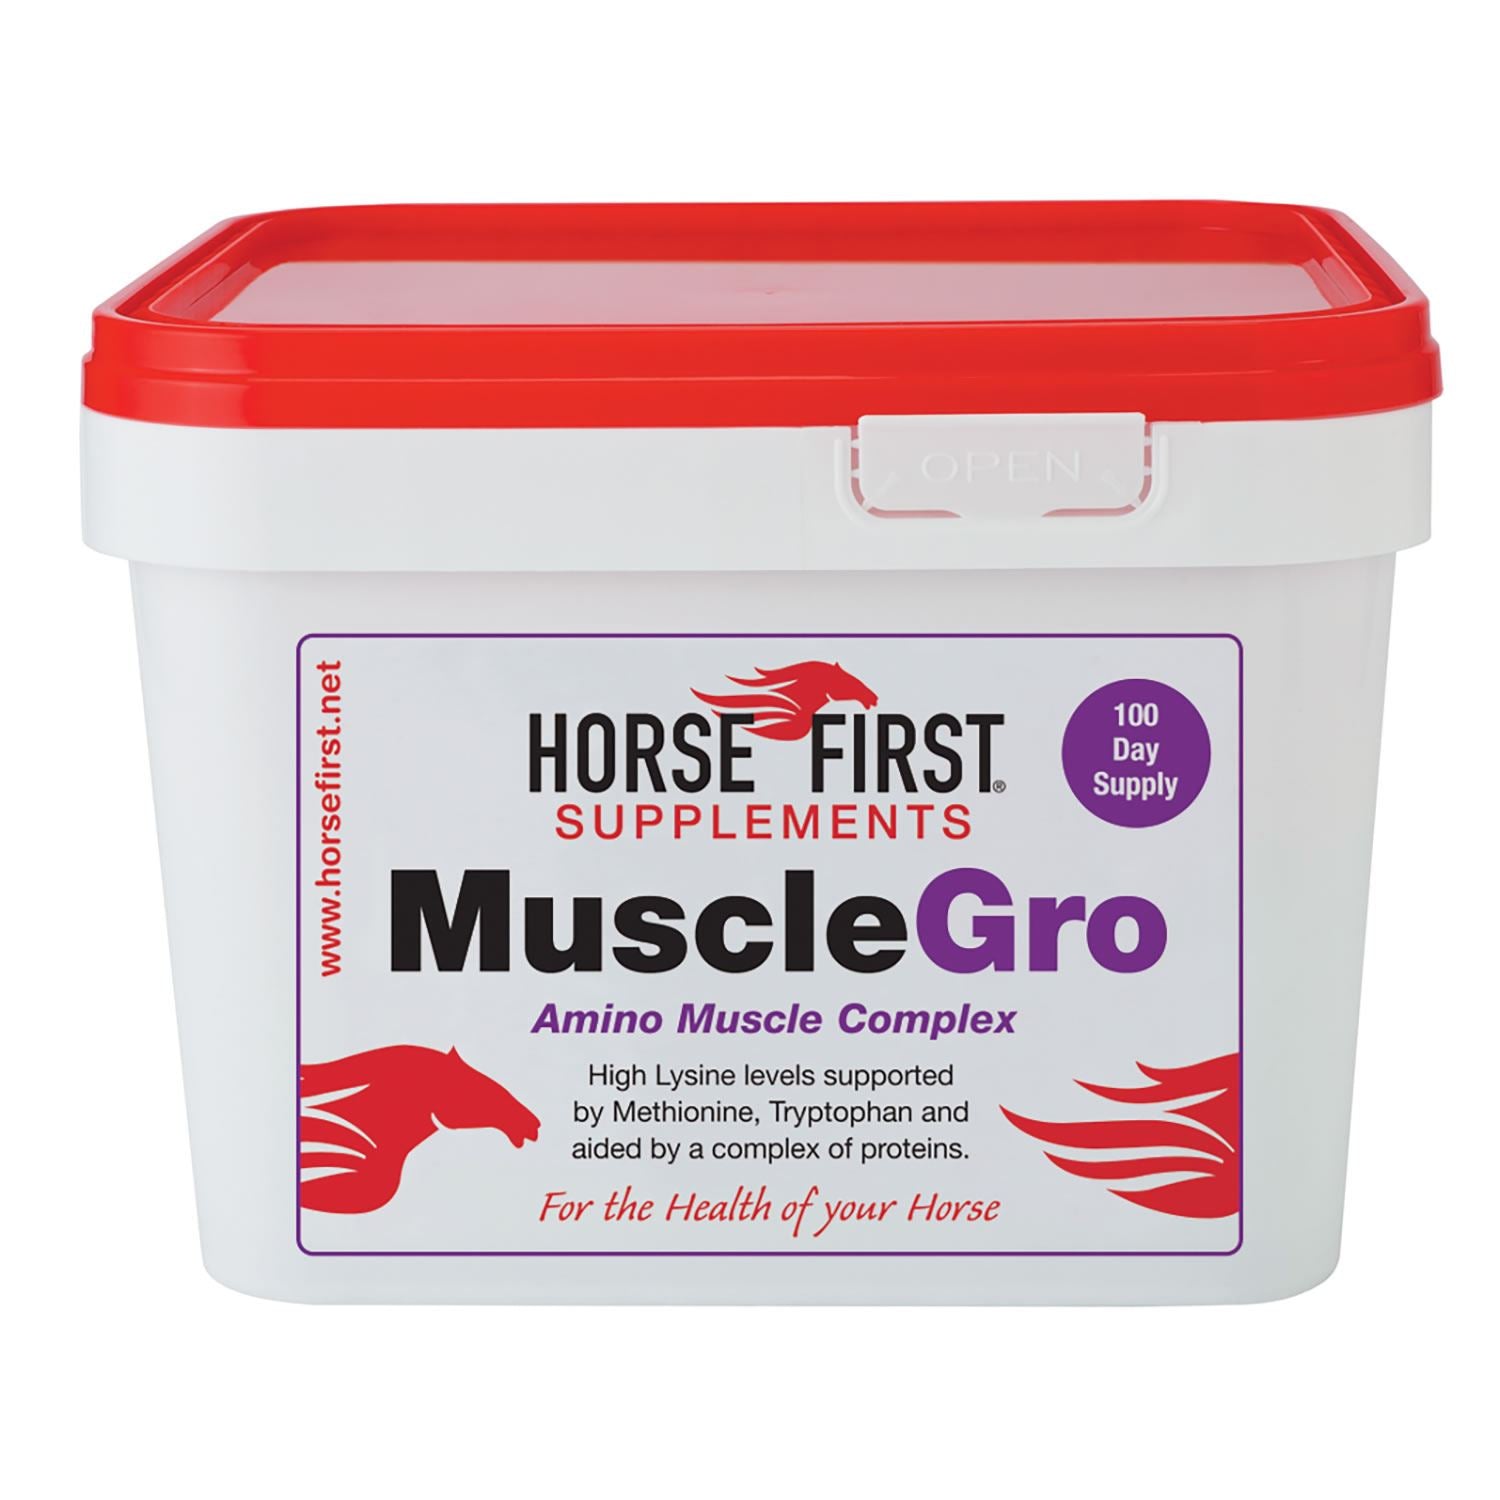 Horse First Musclegro - Just Horse Riders